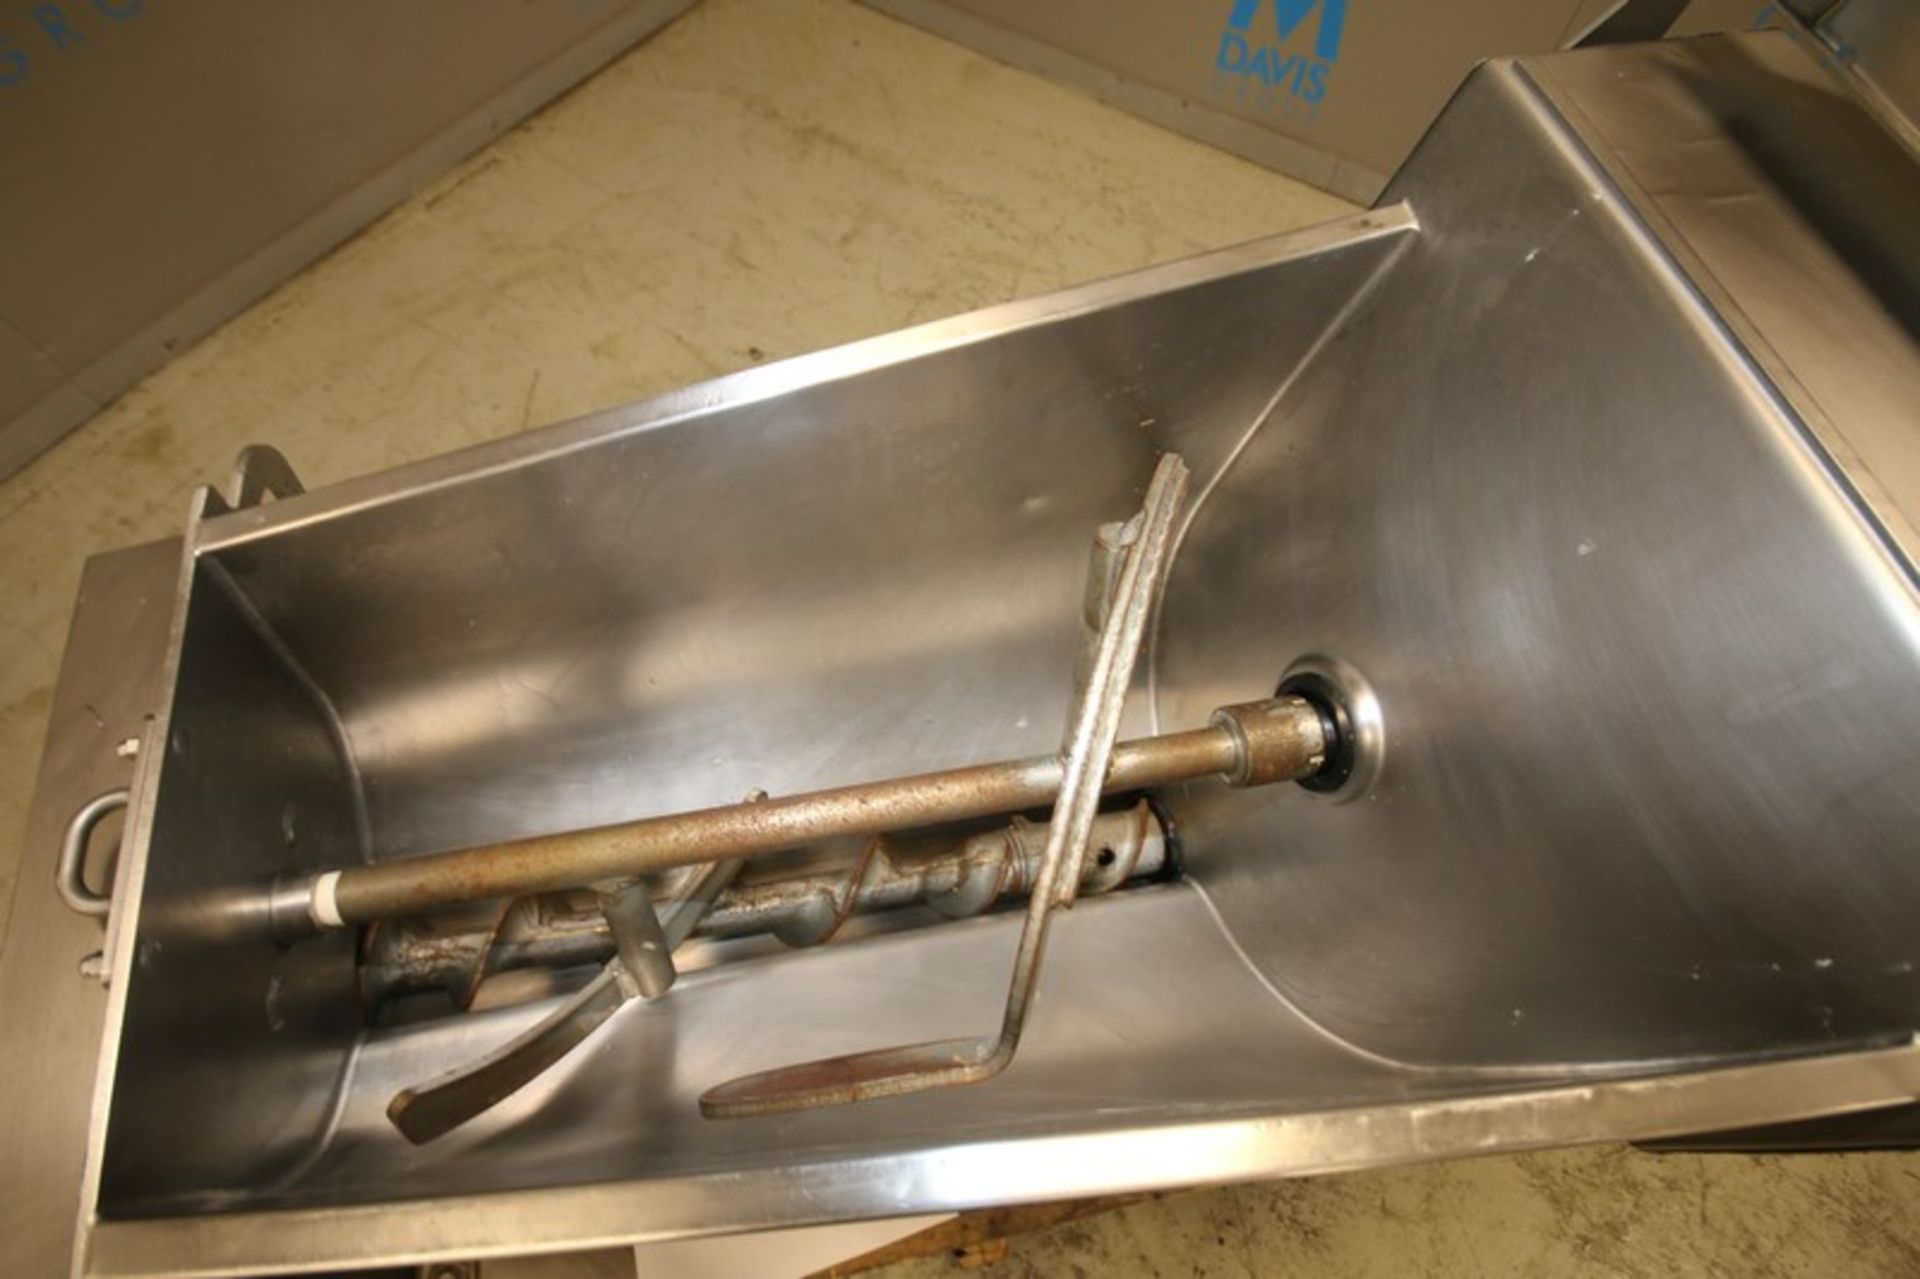 Hobart S/S 150 lb. Capacity Portable Meat Mixer / Grinder, Model MG1532, SN 27-1183-453, with - Image 3 of 8